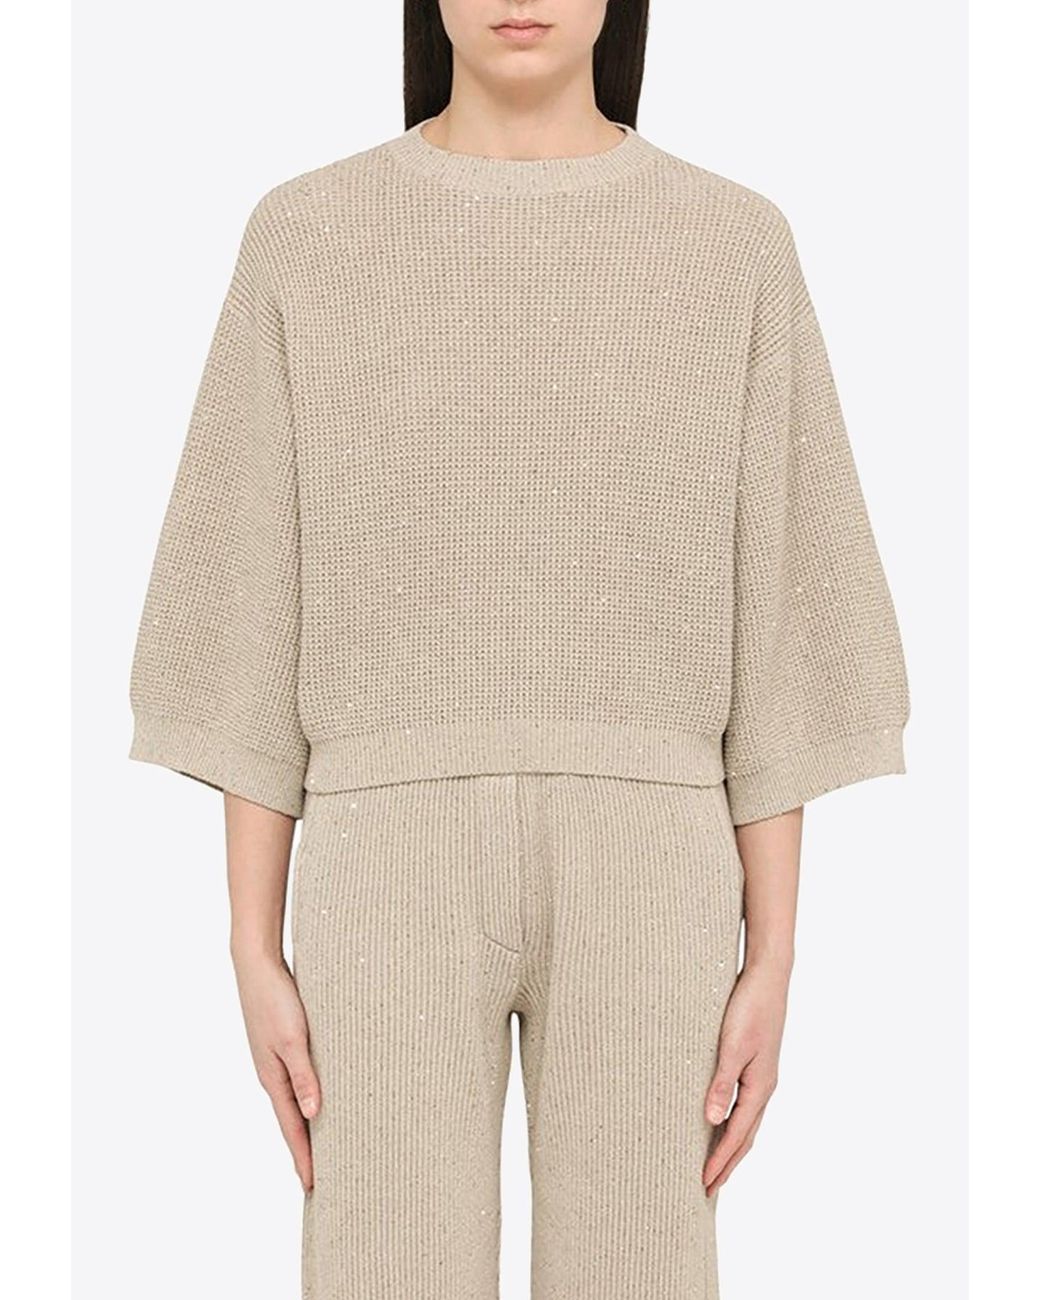 Brunello Cucinelli Sequin Embellished Knit Sweater in Natural | Lyst